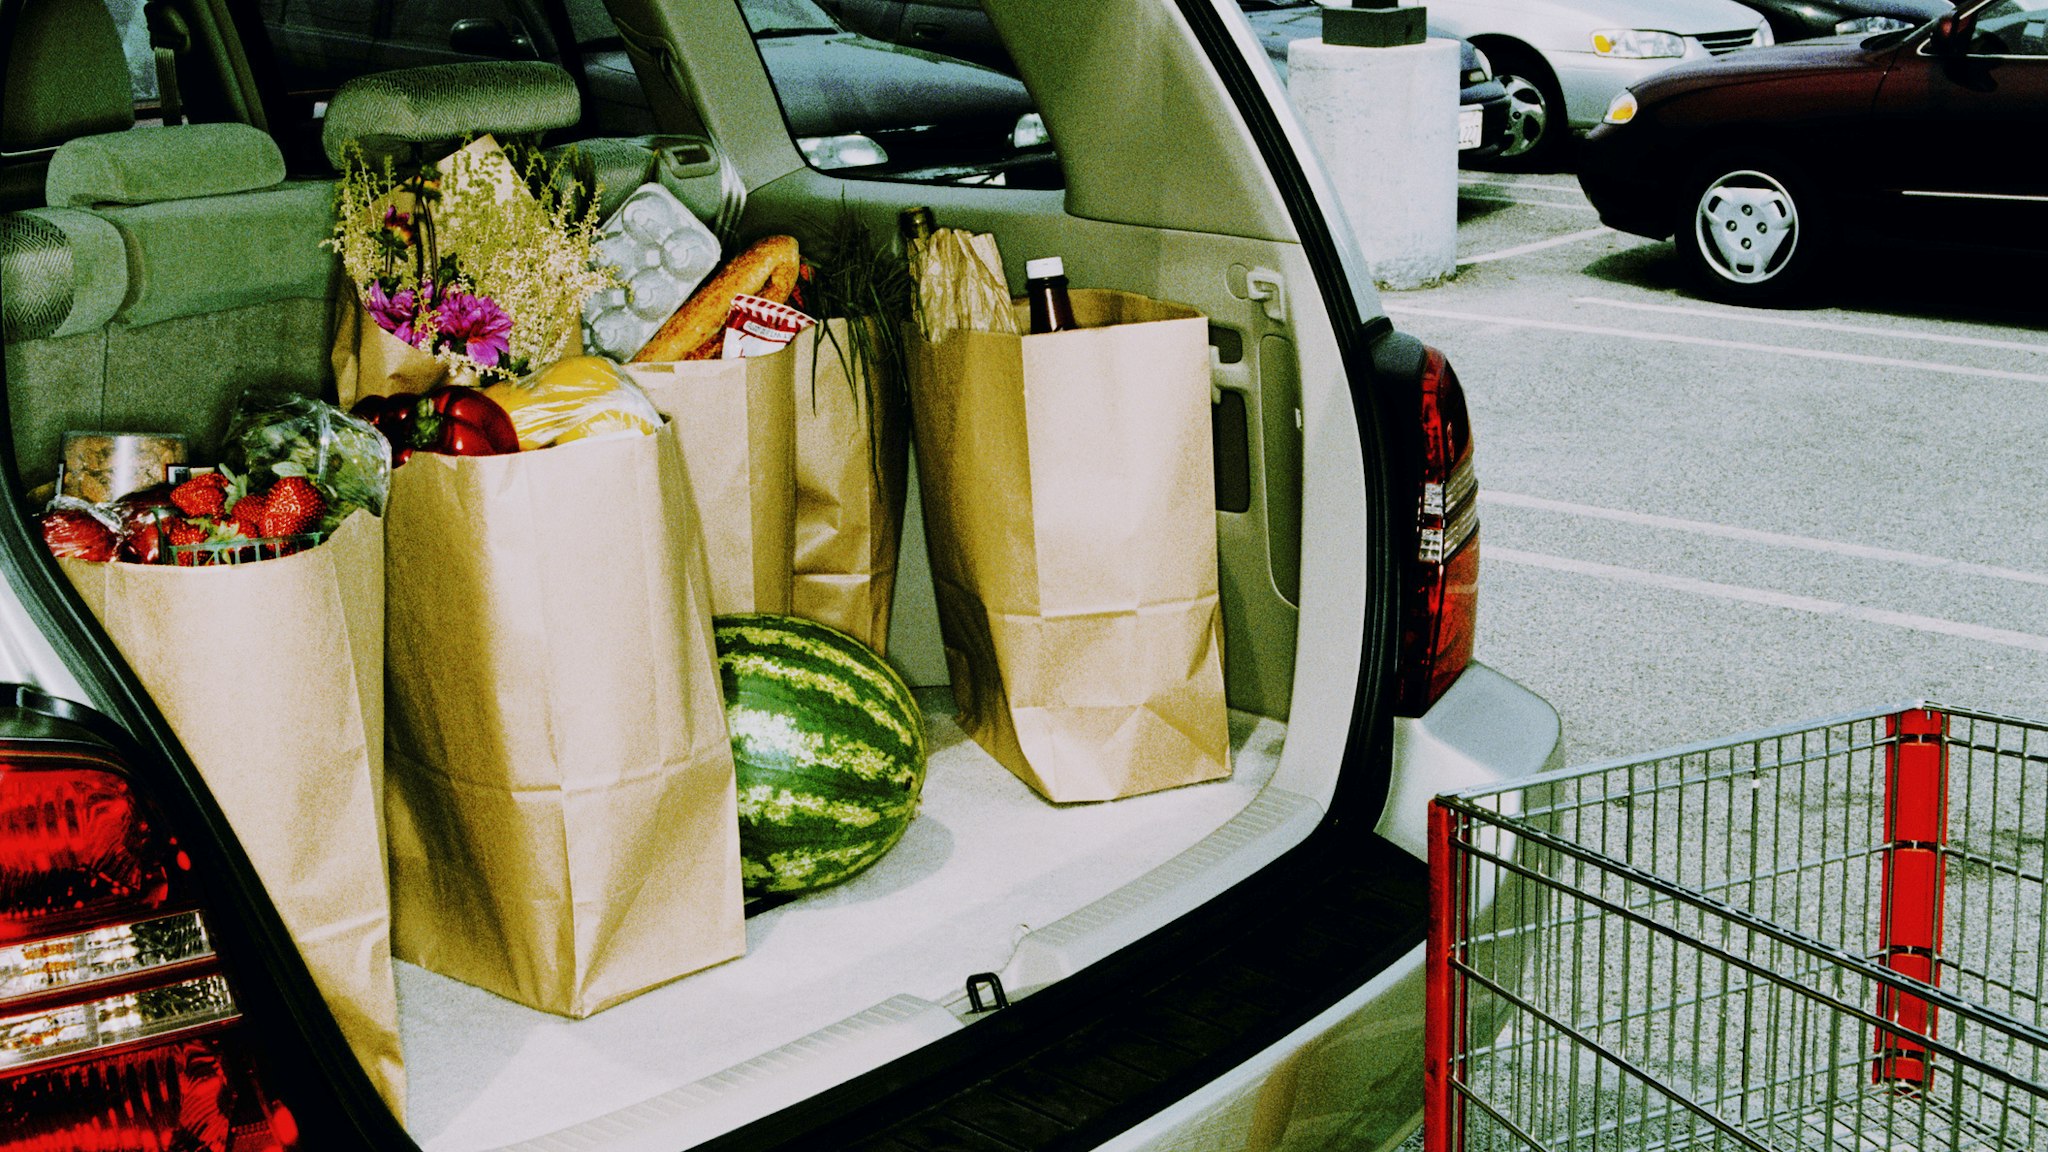 Groceries in back of car, parked in parking lot